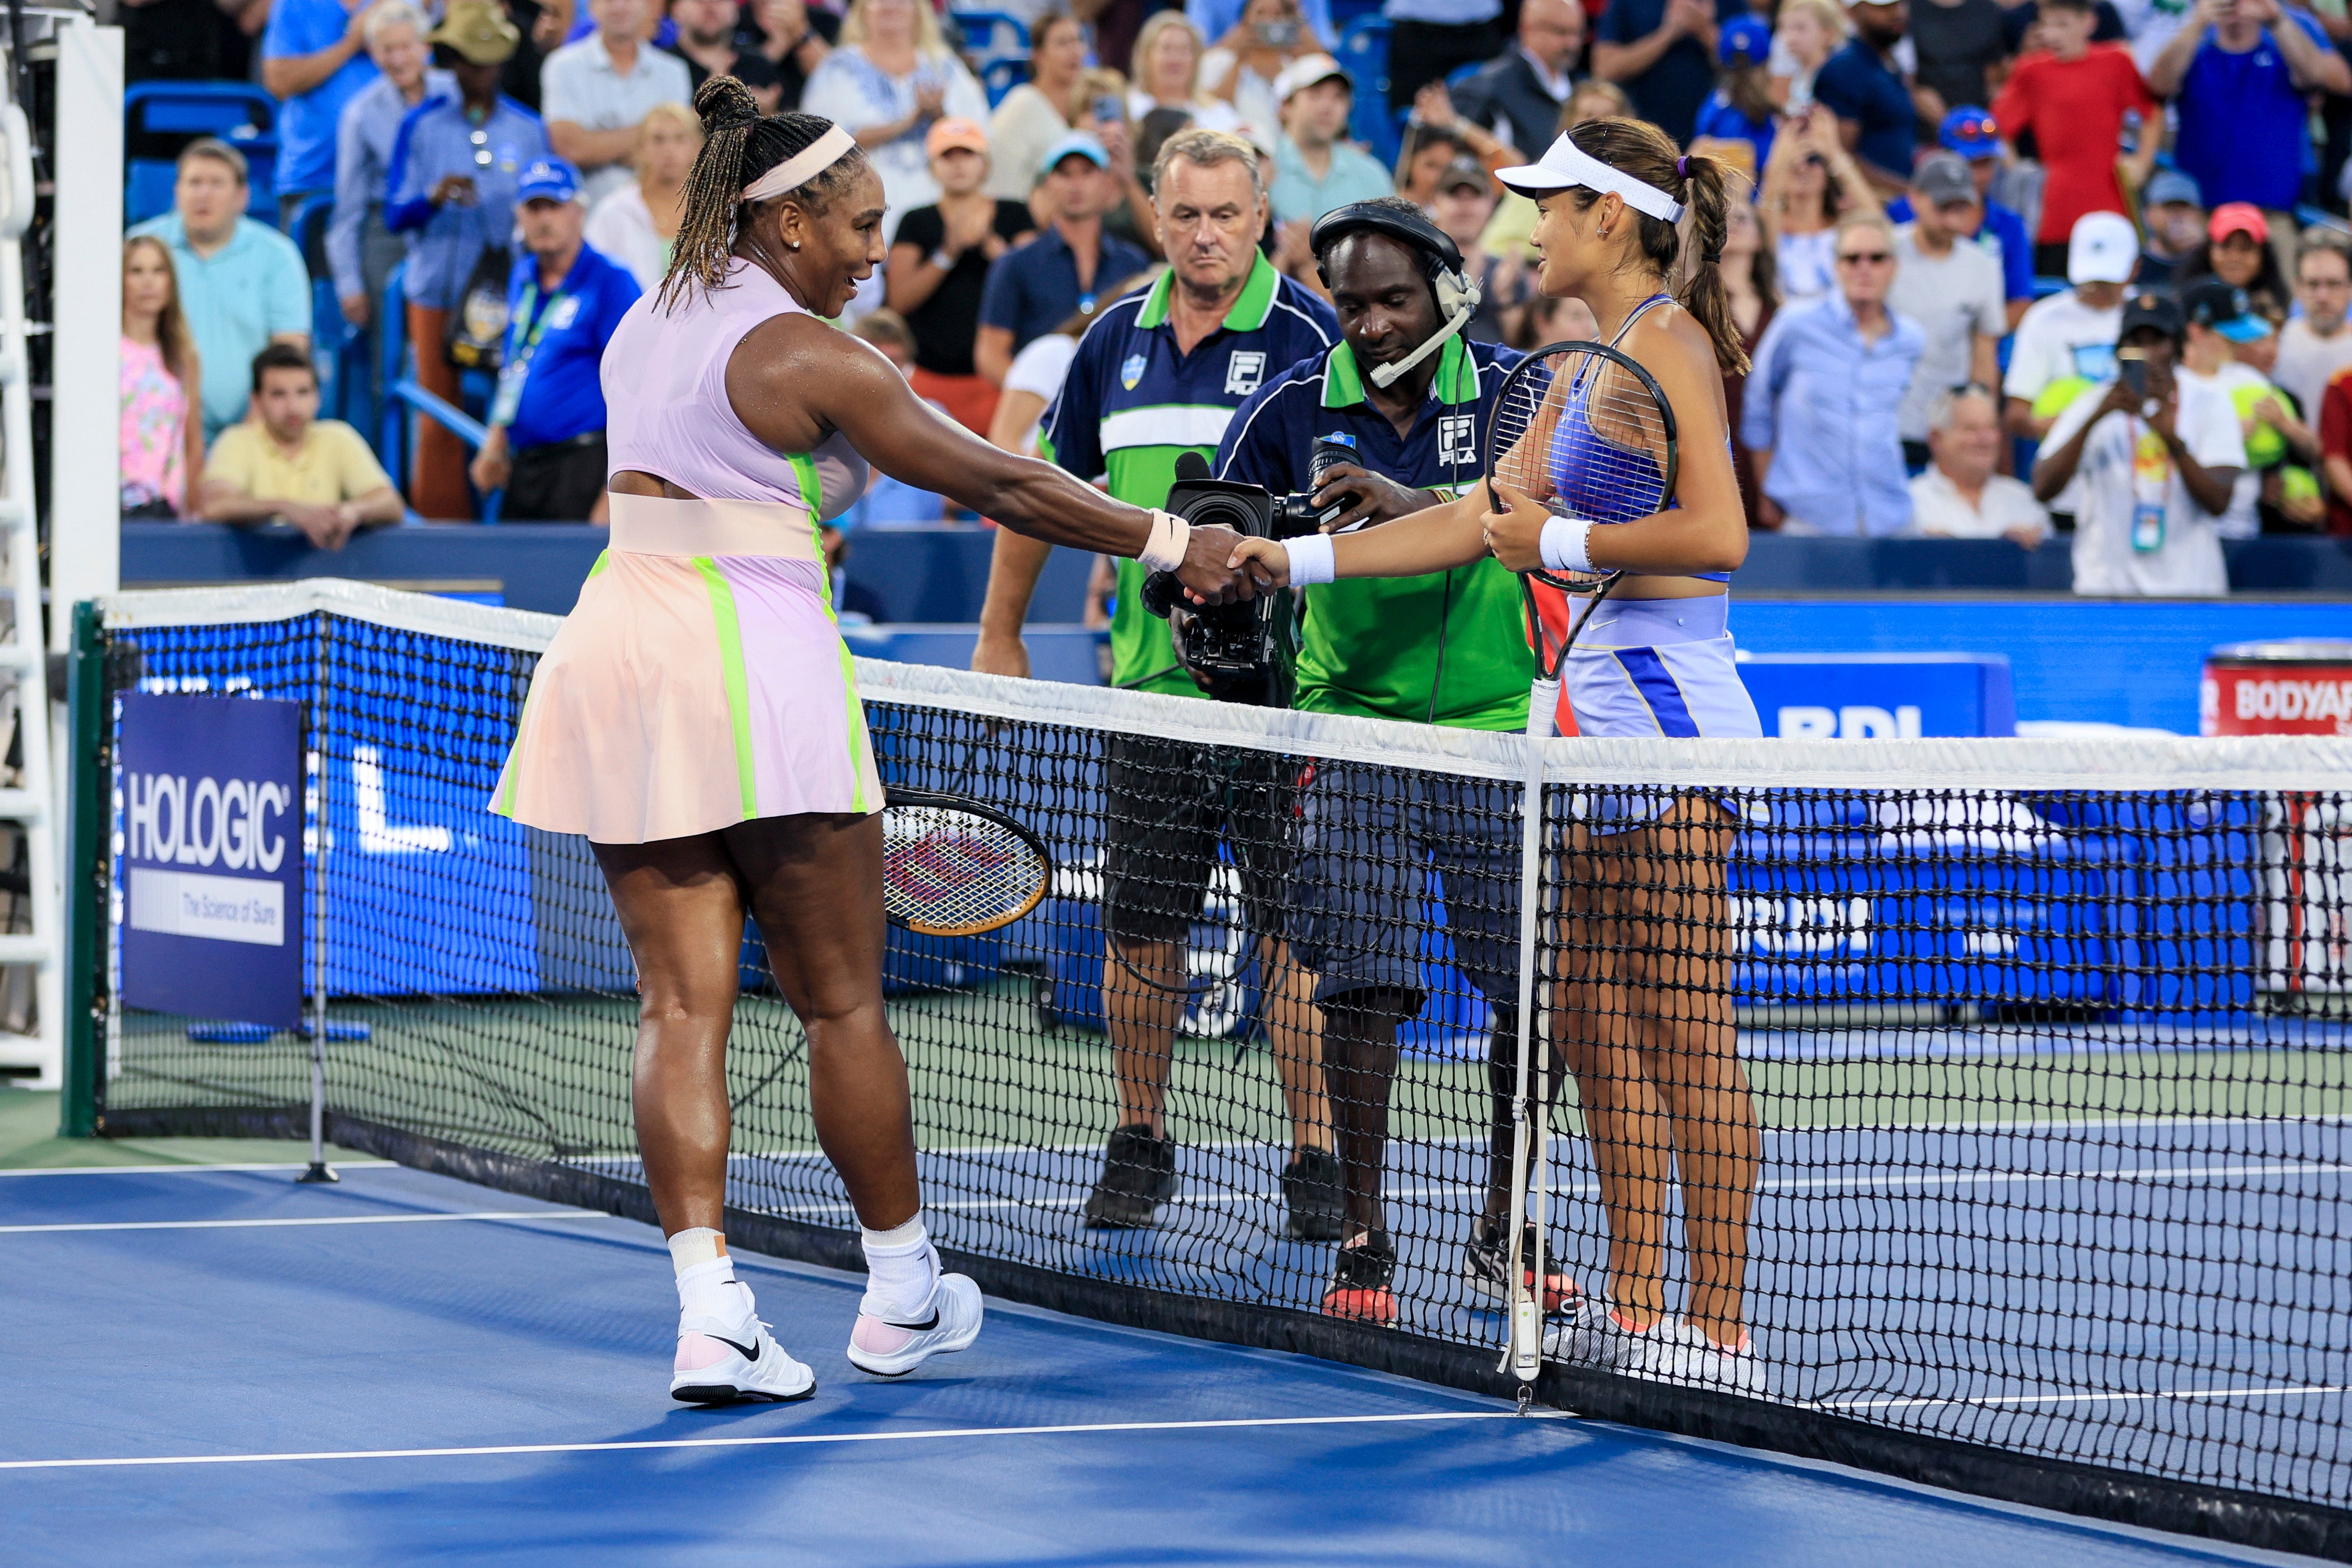 Emma Raducanu (right) is taking encouragement from her victory over Serena Williams